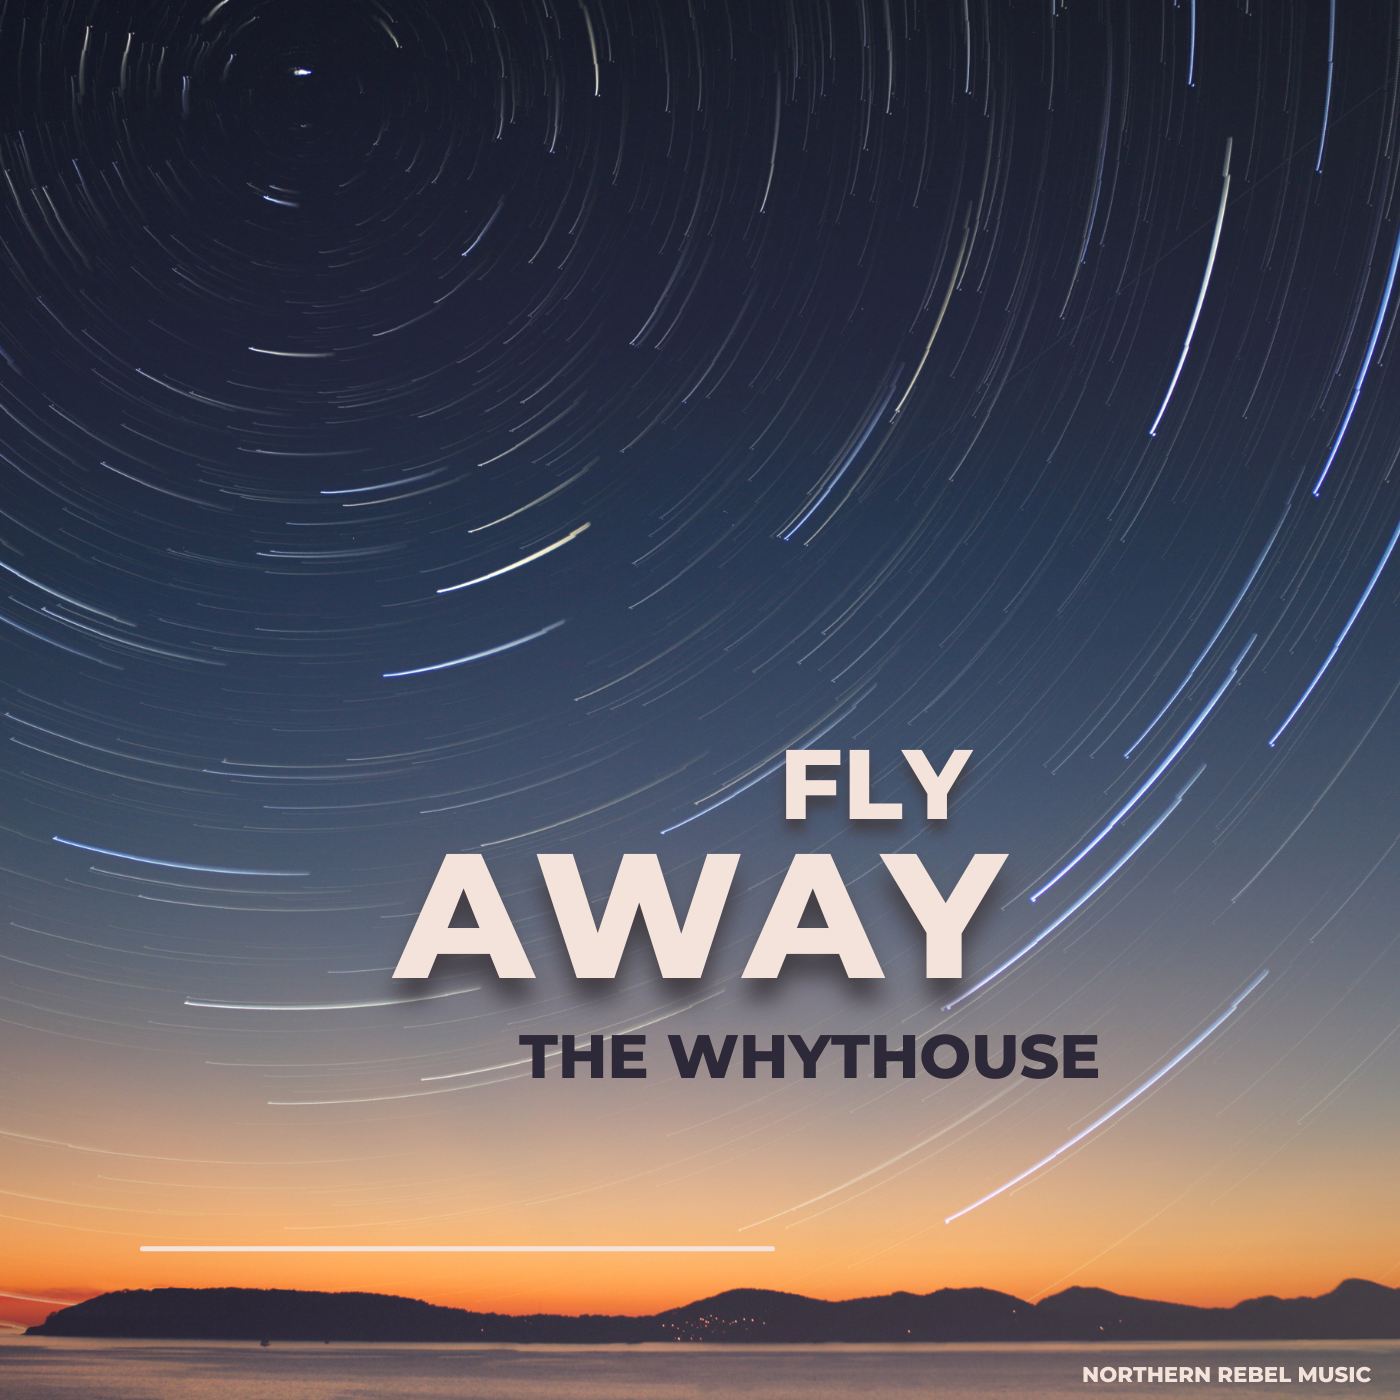 Art for Fly Away by The Whythouse